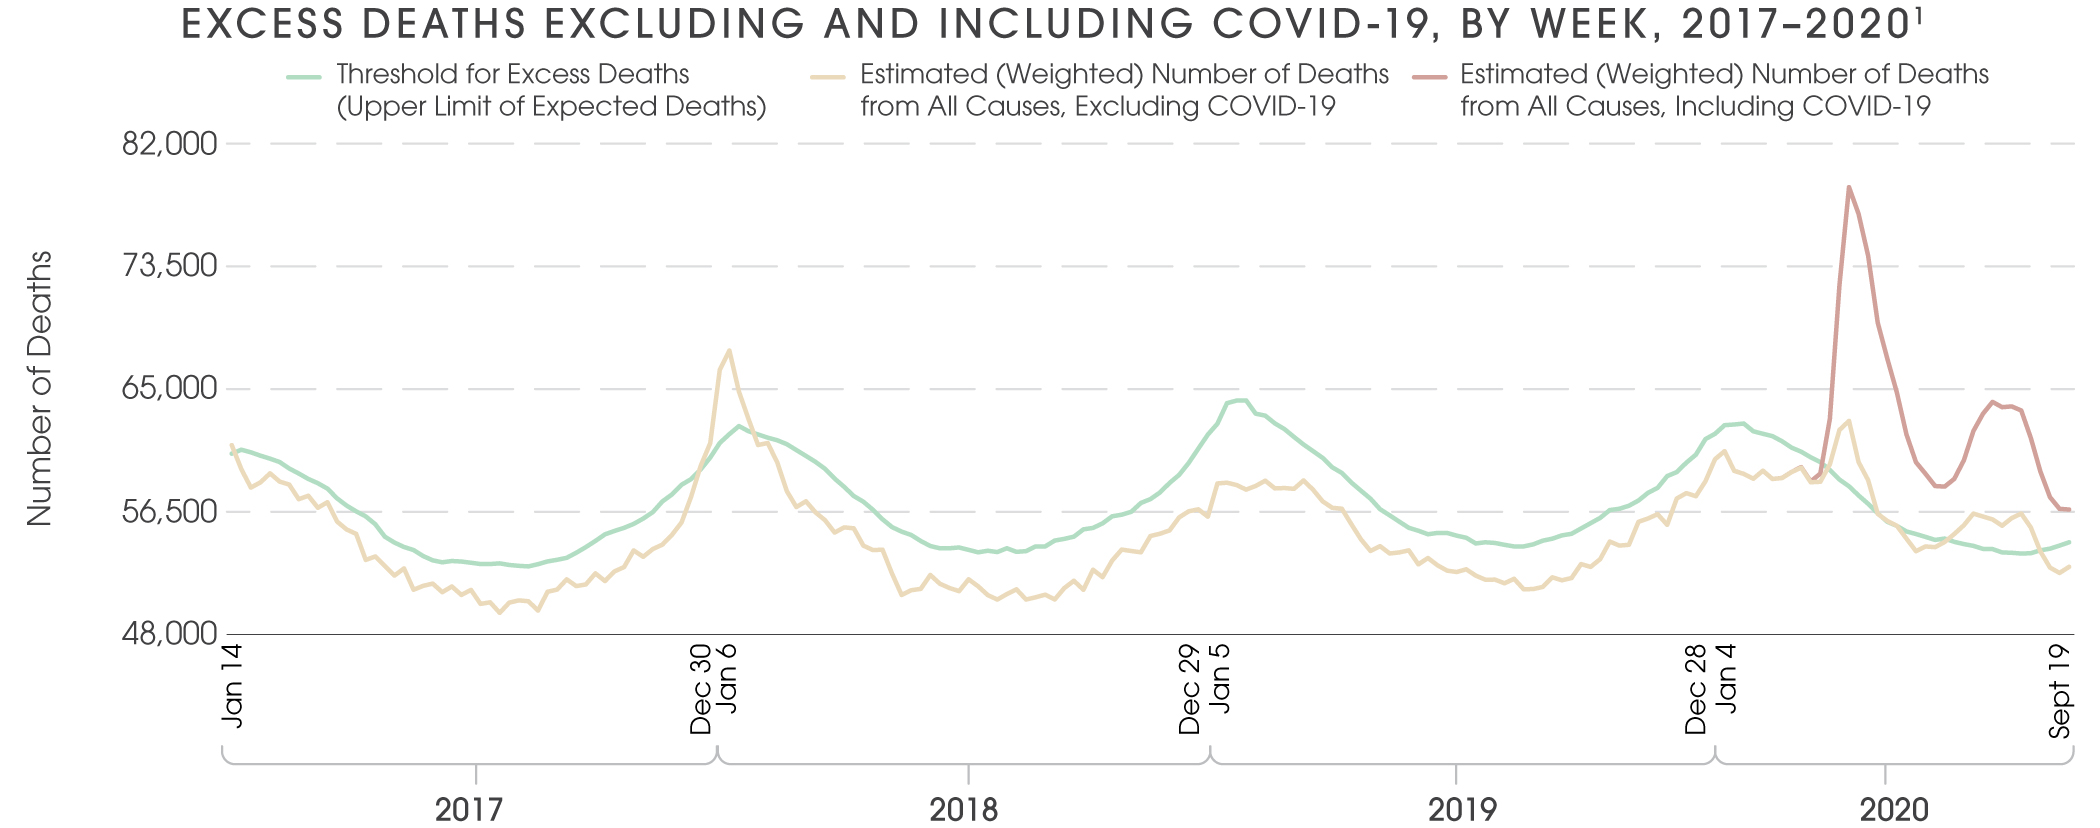 EXCESS DEATHS EXCLUDING AND INCLUDING COVID-19, BY WEEK, 2017–20201